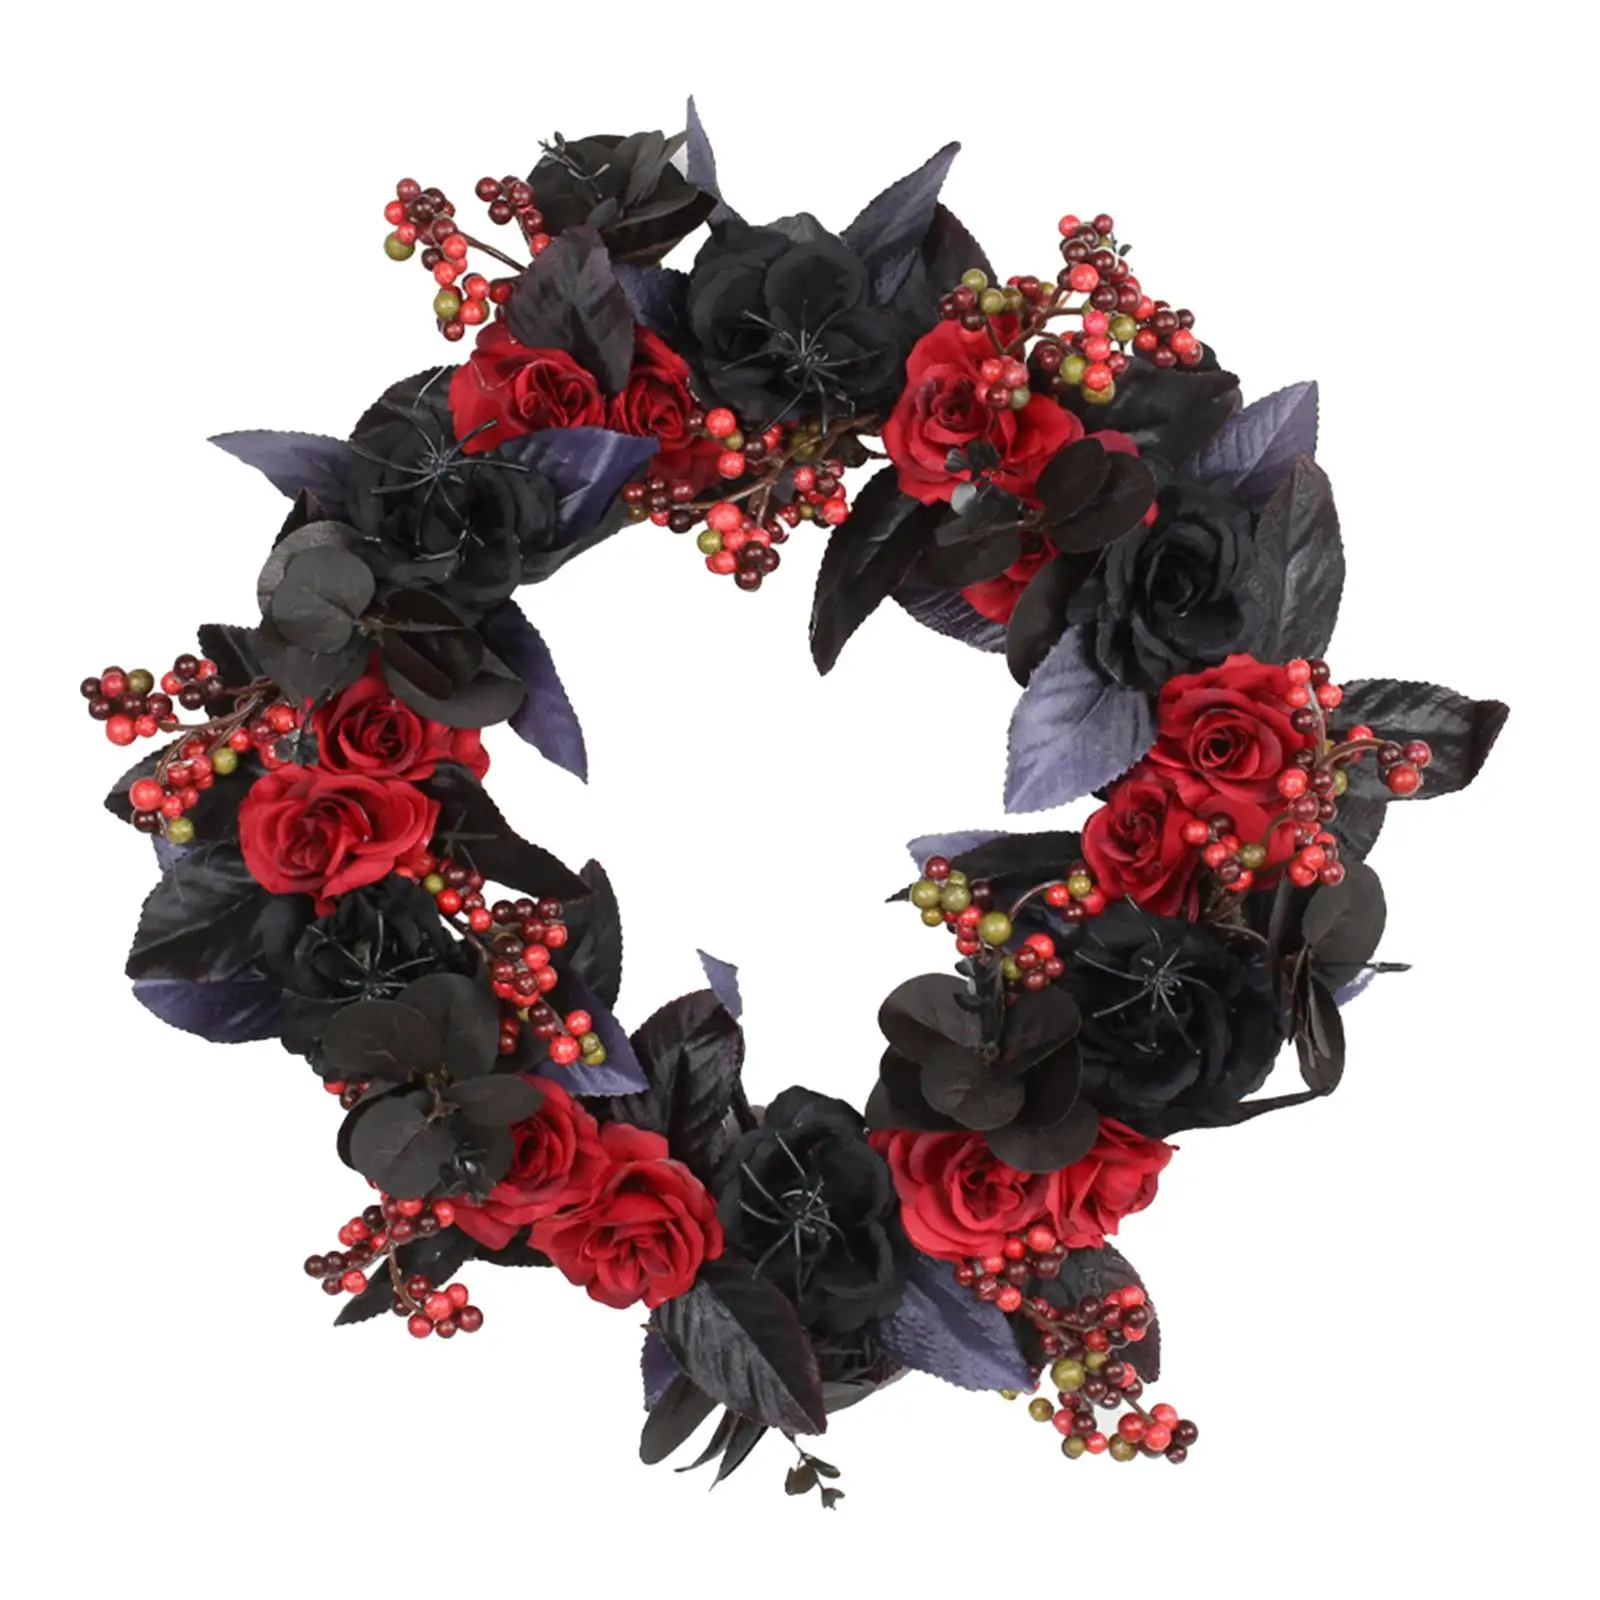 Artificial Flower Wreath Decorative Door Hanging Decor Black and Red Rose Wreath for Garden Farmhouse Office Indoor Festival